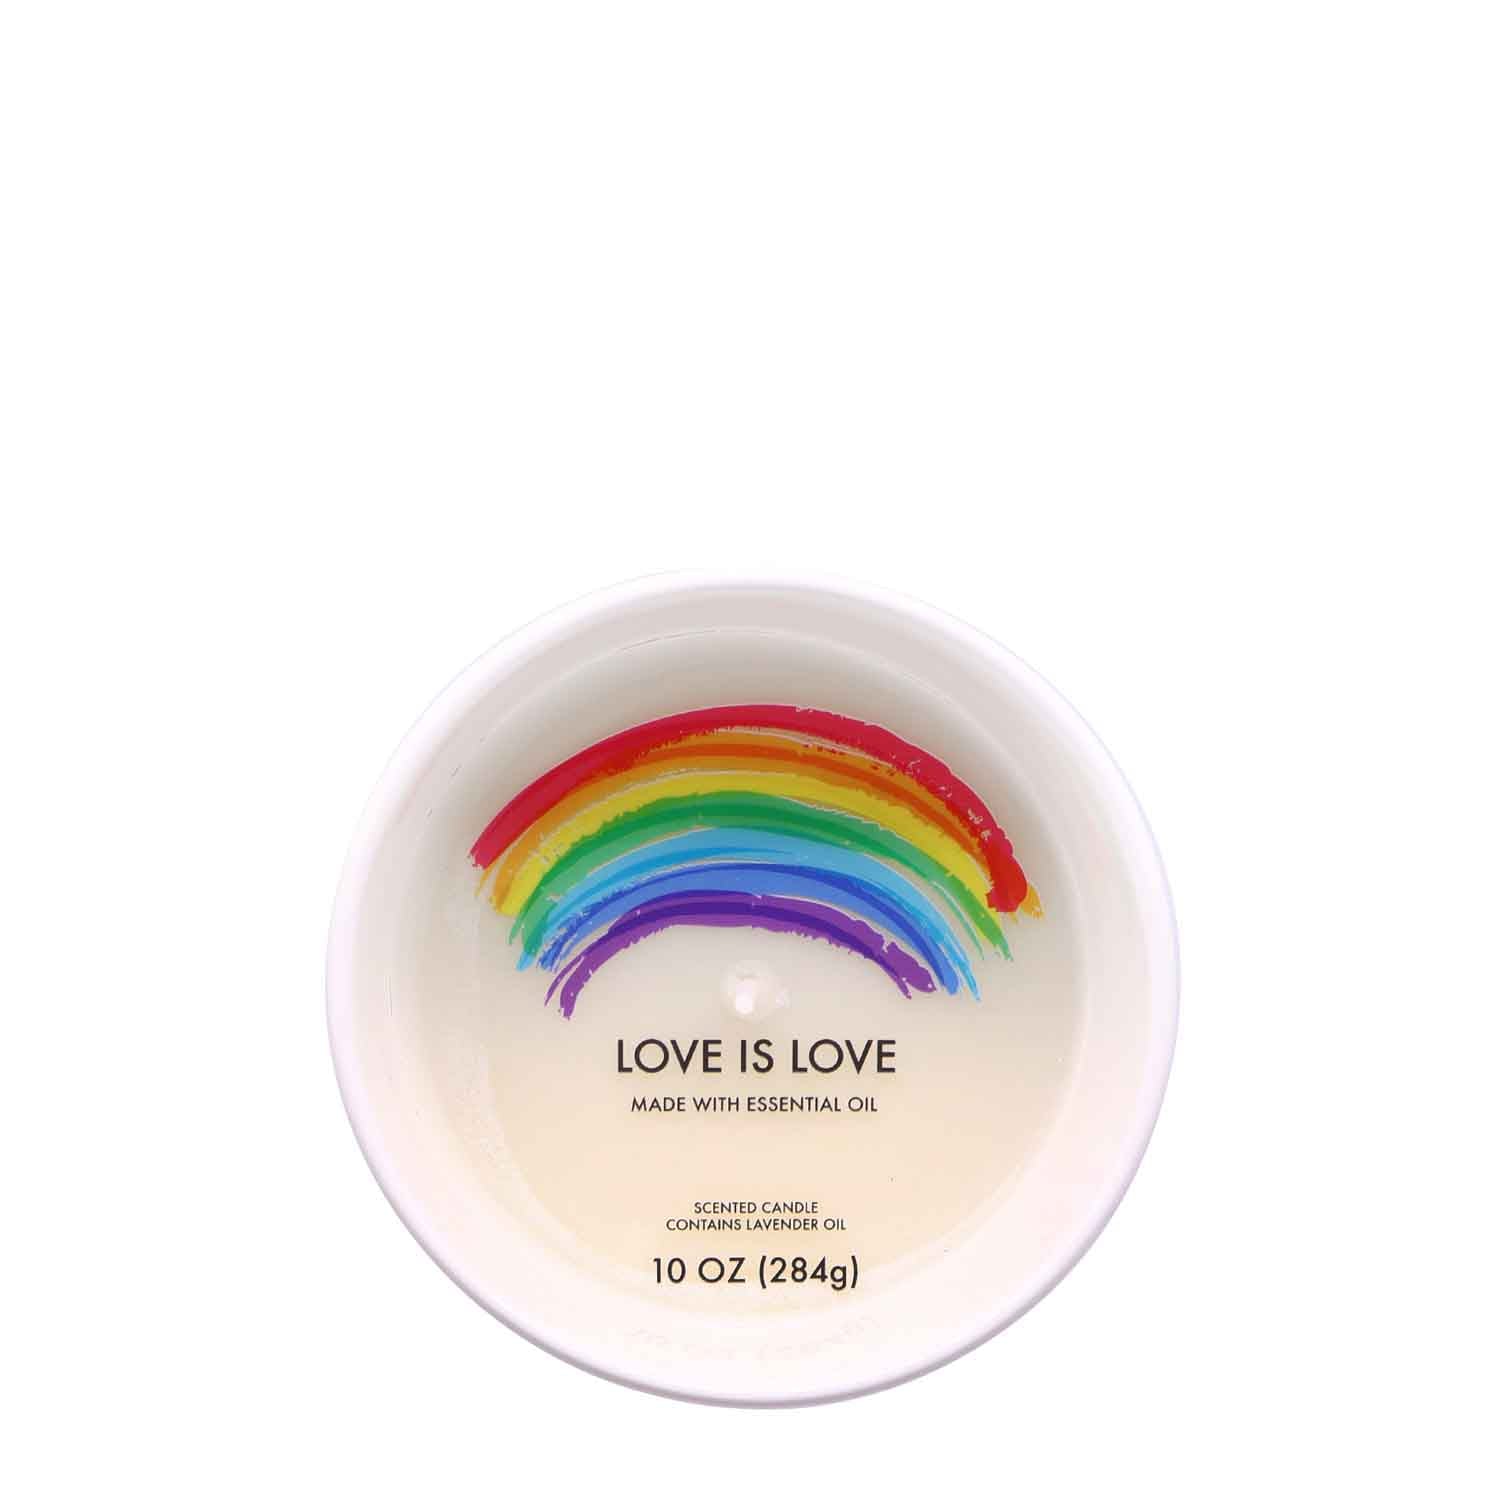 A white bowl with a Love is Love Scented Ceramic Candle (10 oz) – Pride Collection painted on it, made by Tuscany Candle® SEASONAL.